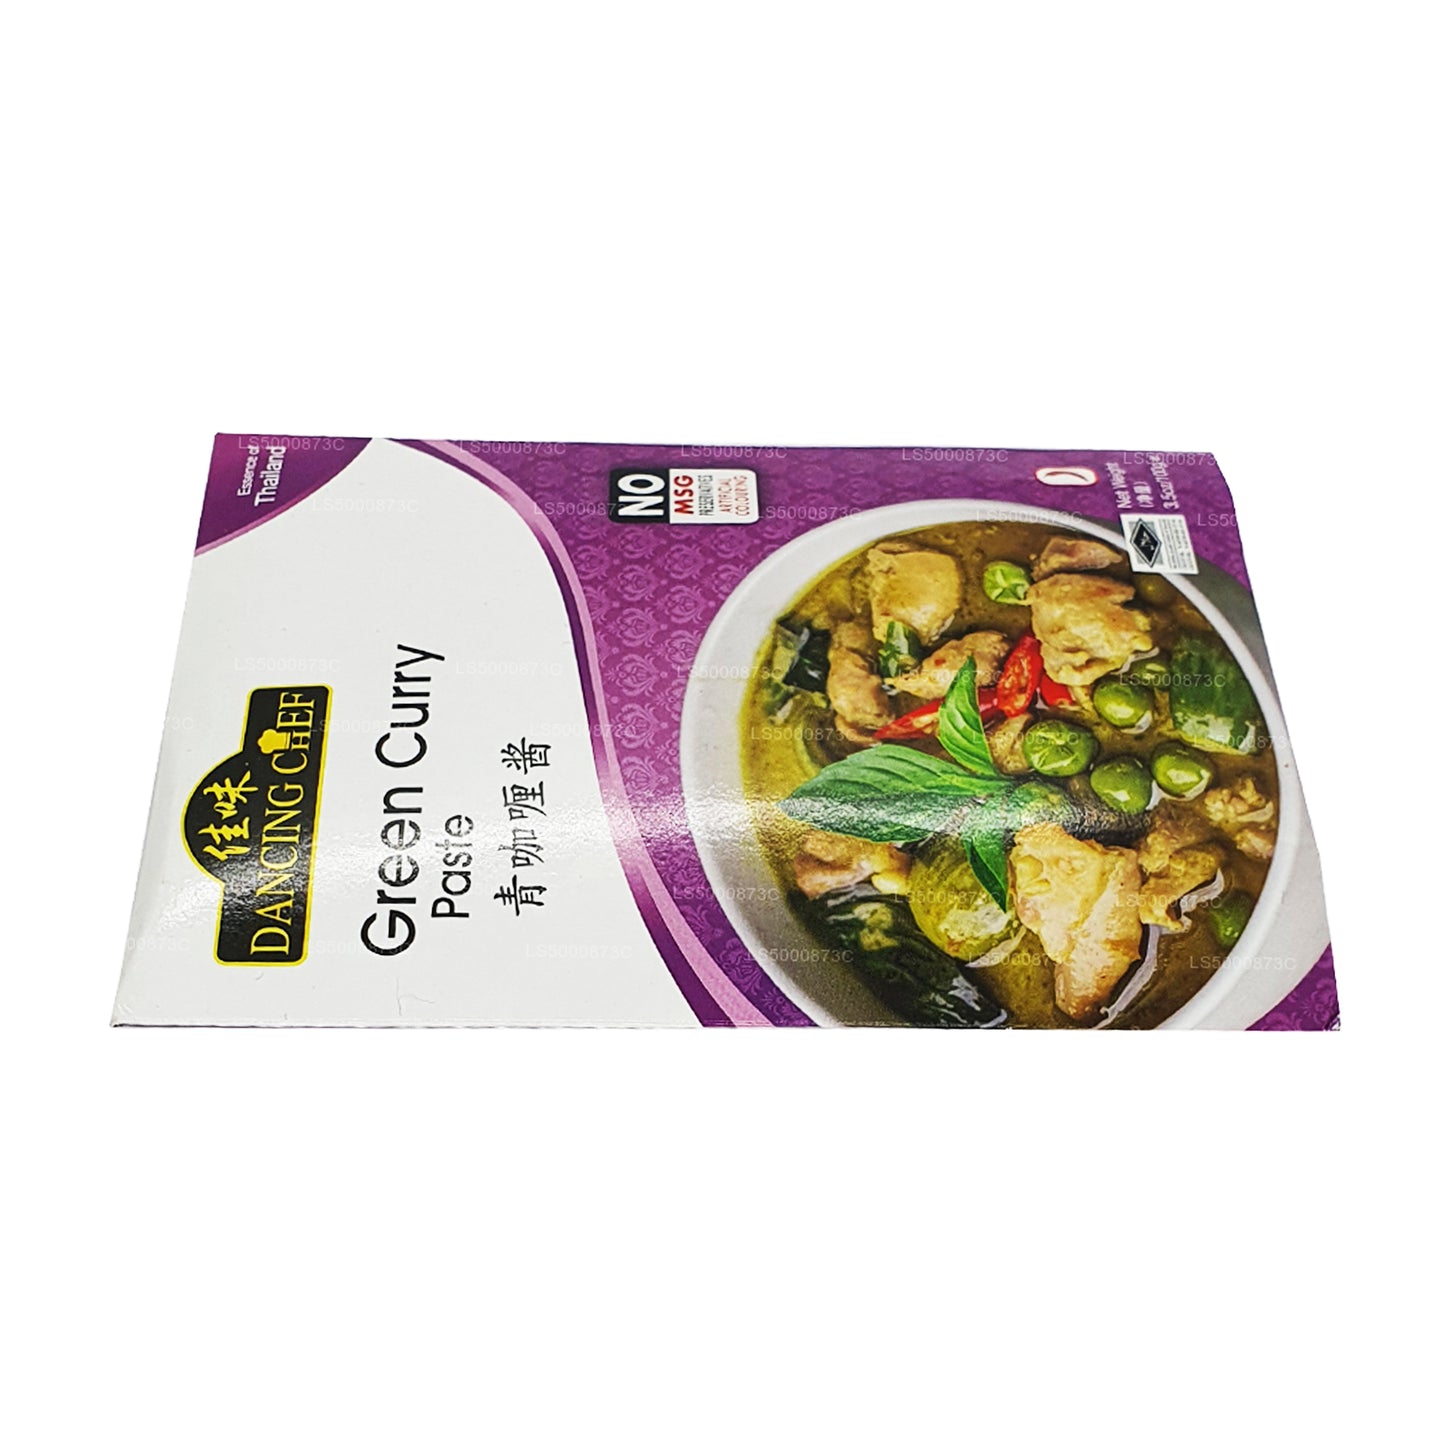 Dancing Chef Green Curry Paste (100g)